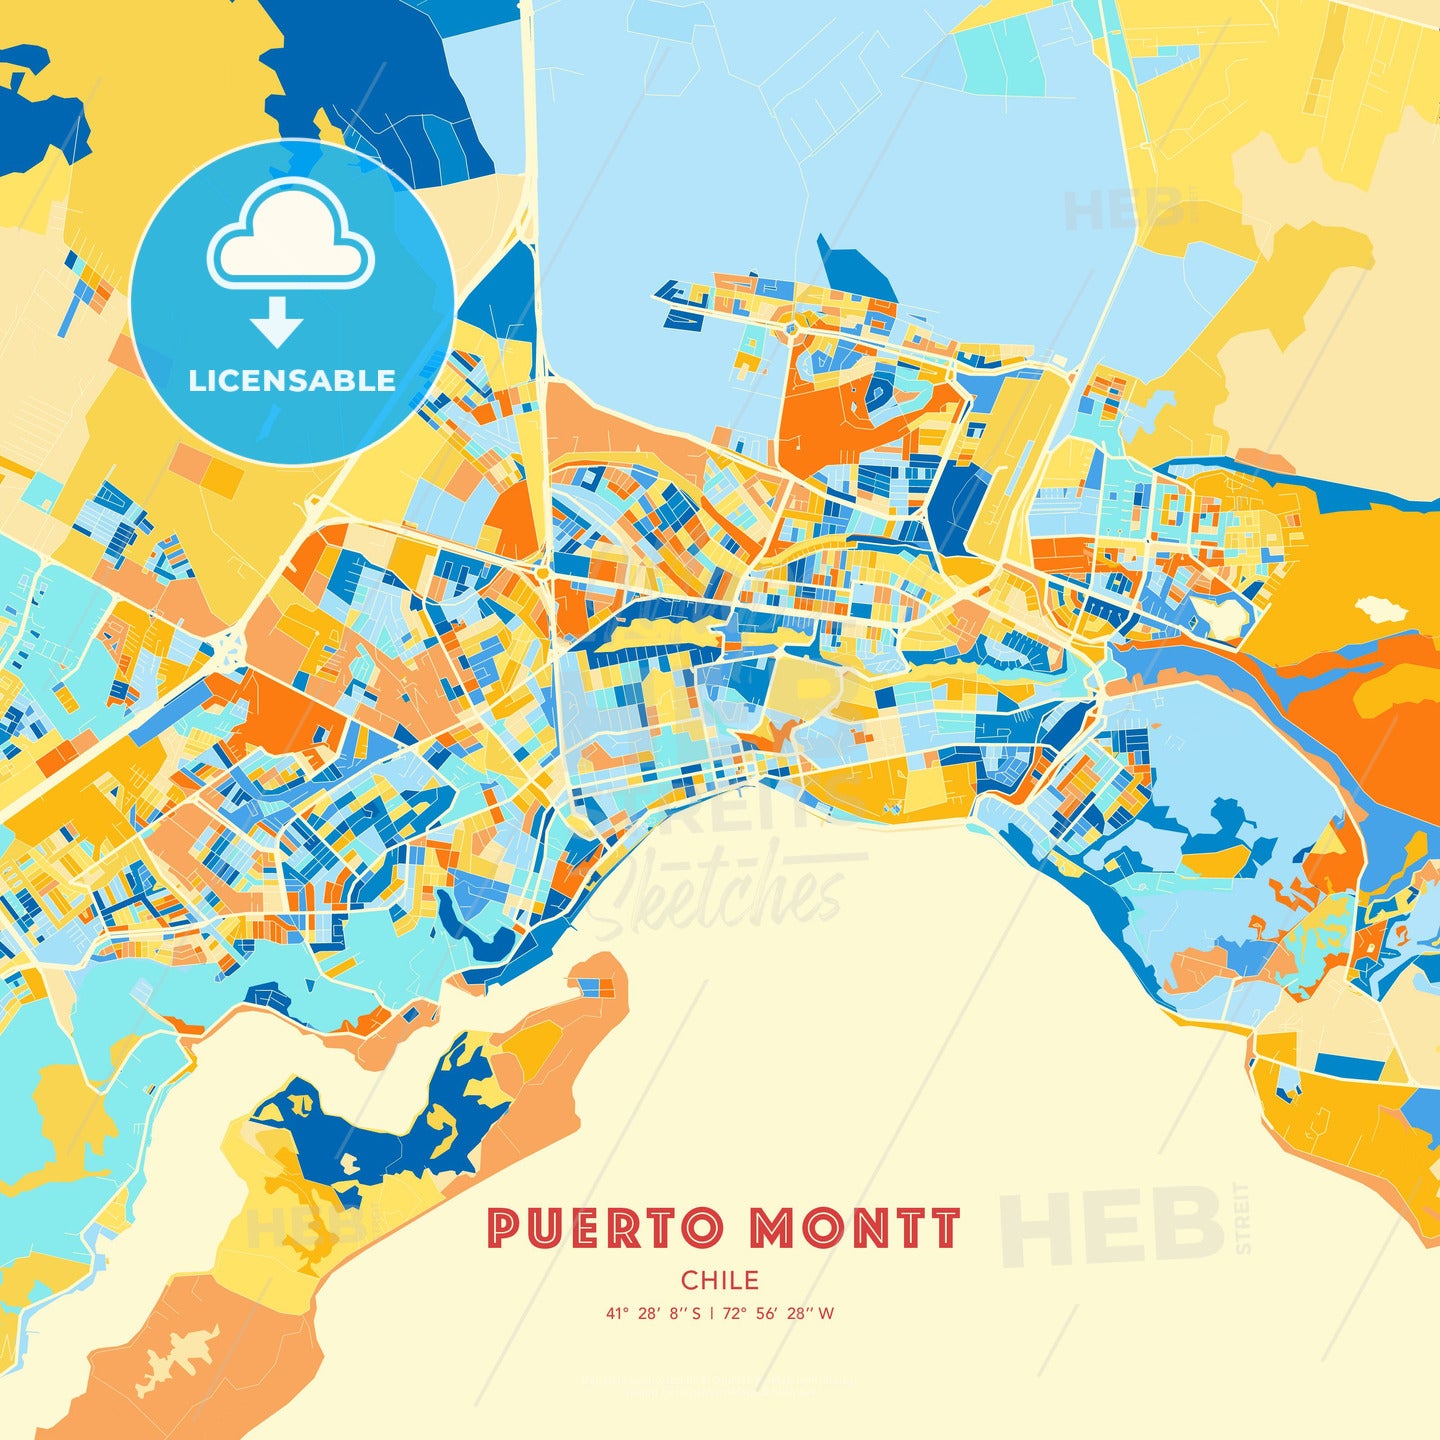 Puerto Montt, Chile, map - HEBSTREITS Sketches